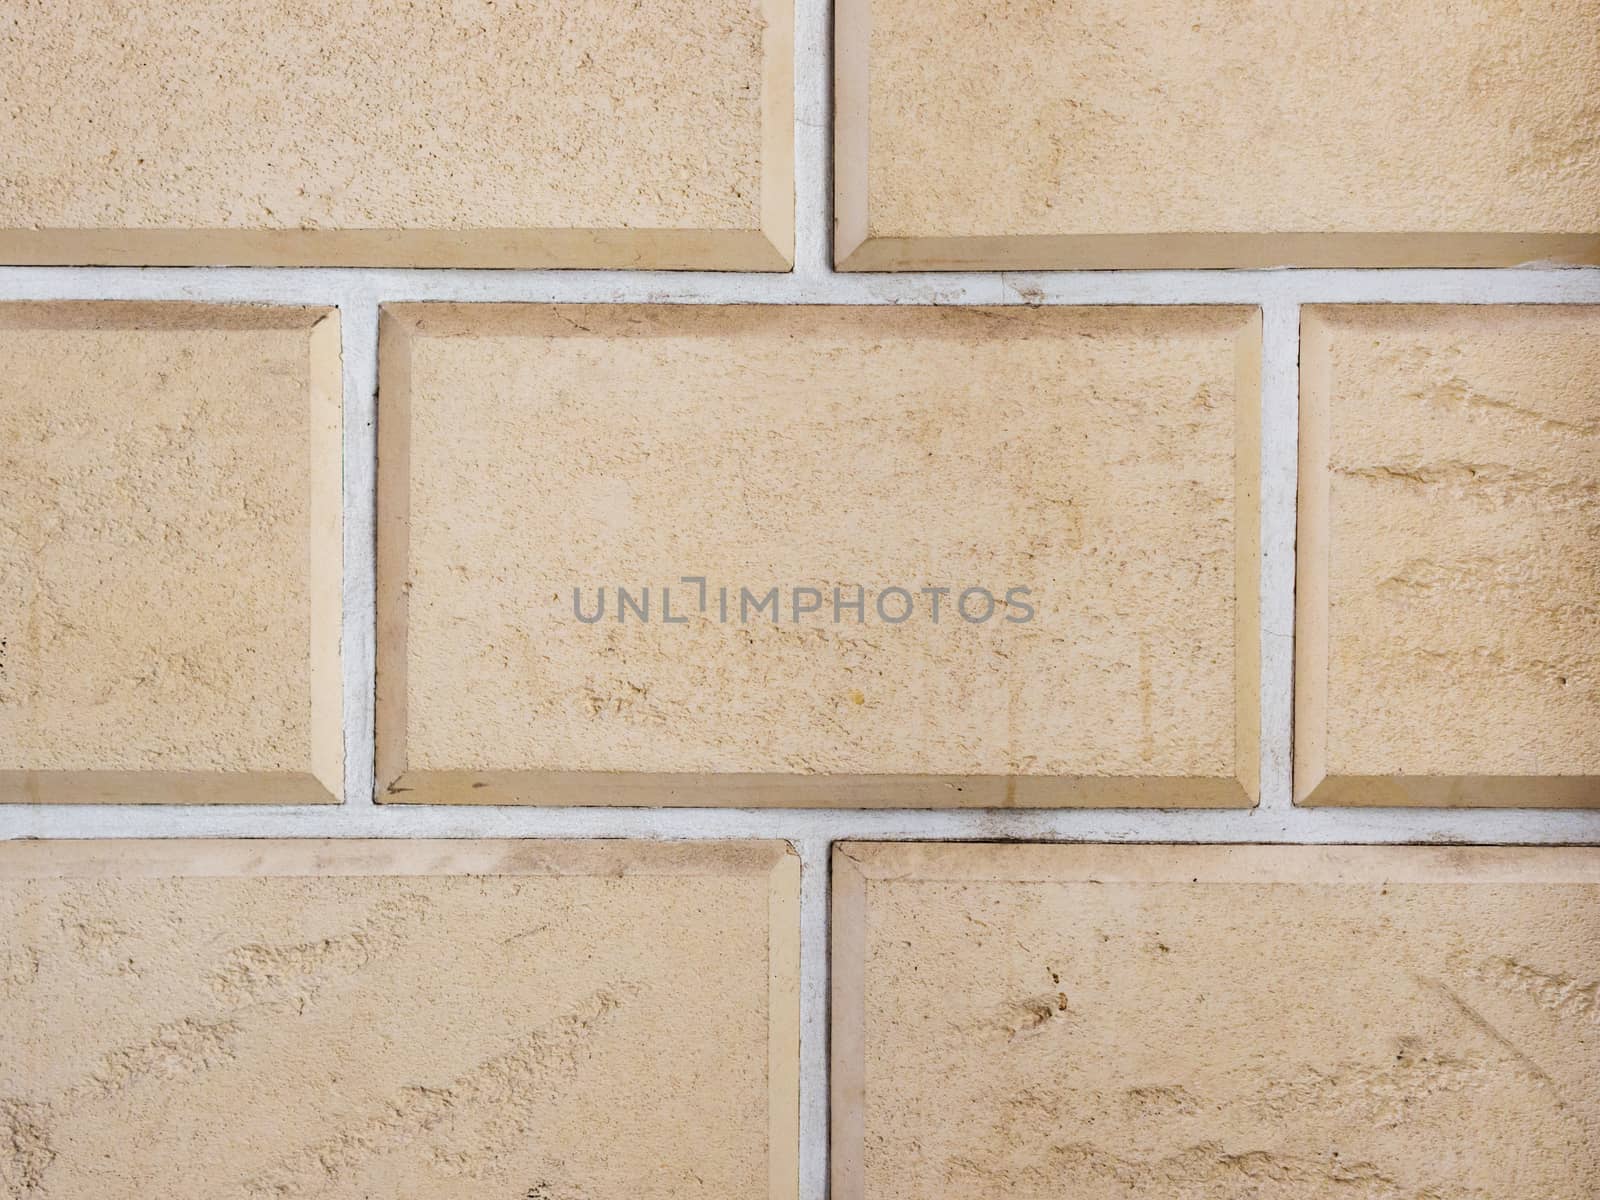 a wall from an artificial beige stone facade with rough fractured surfaces, laid as a brick